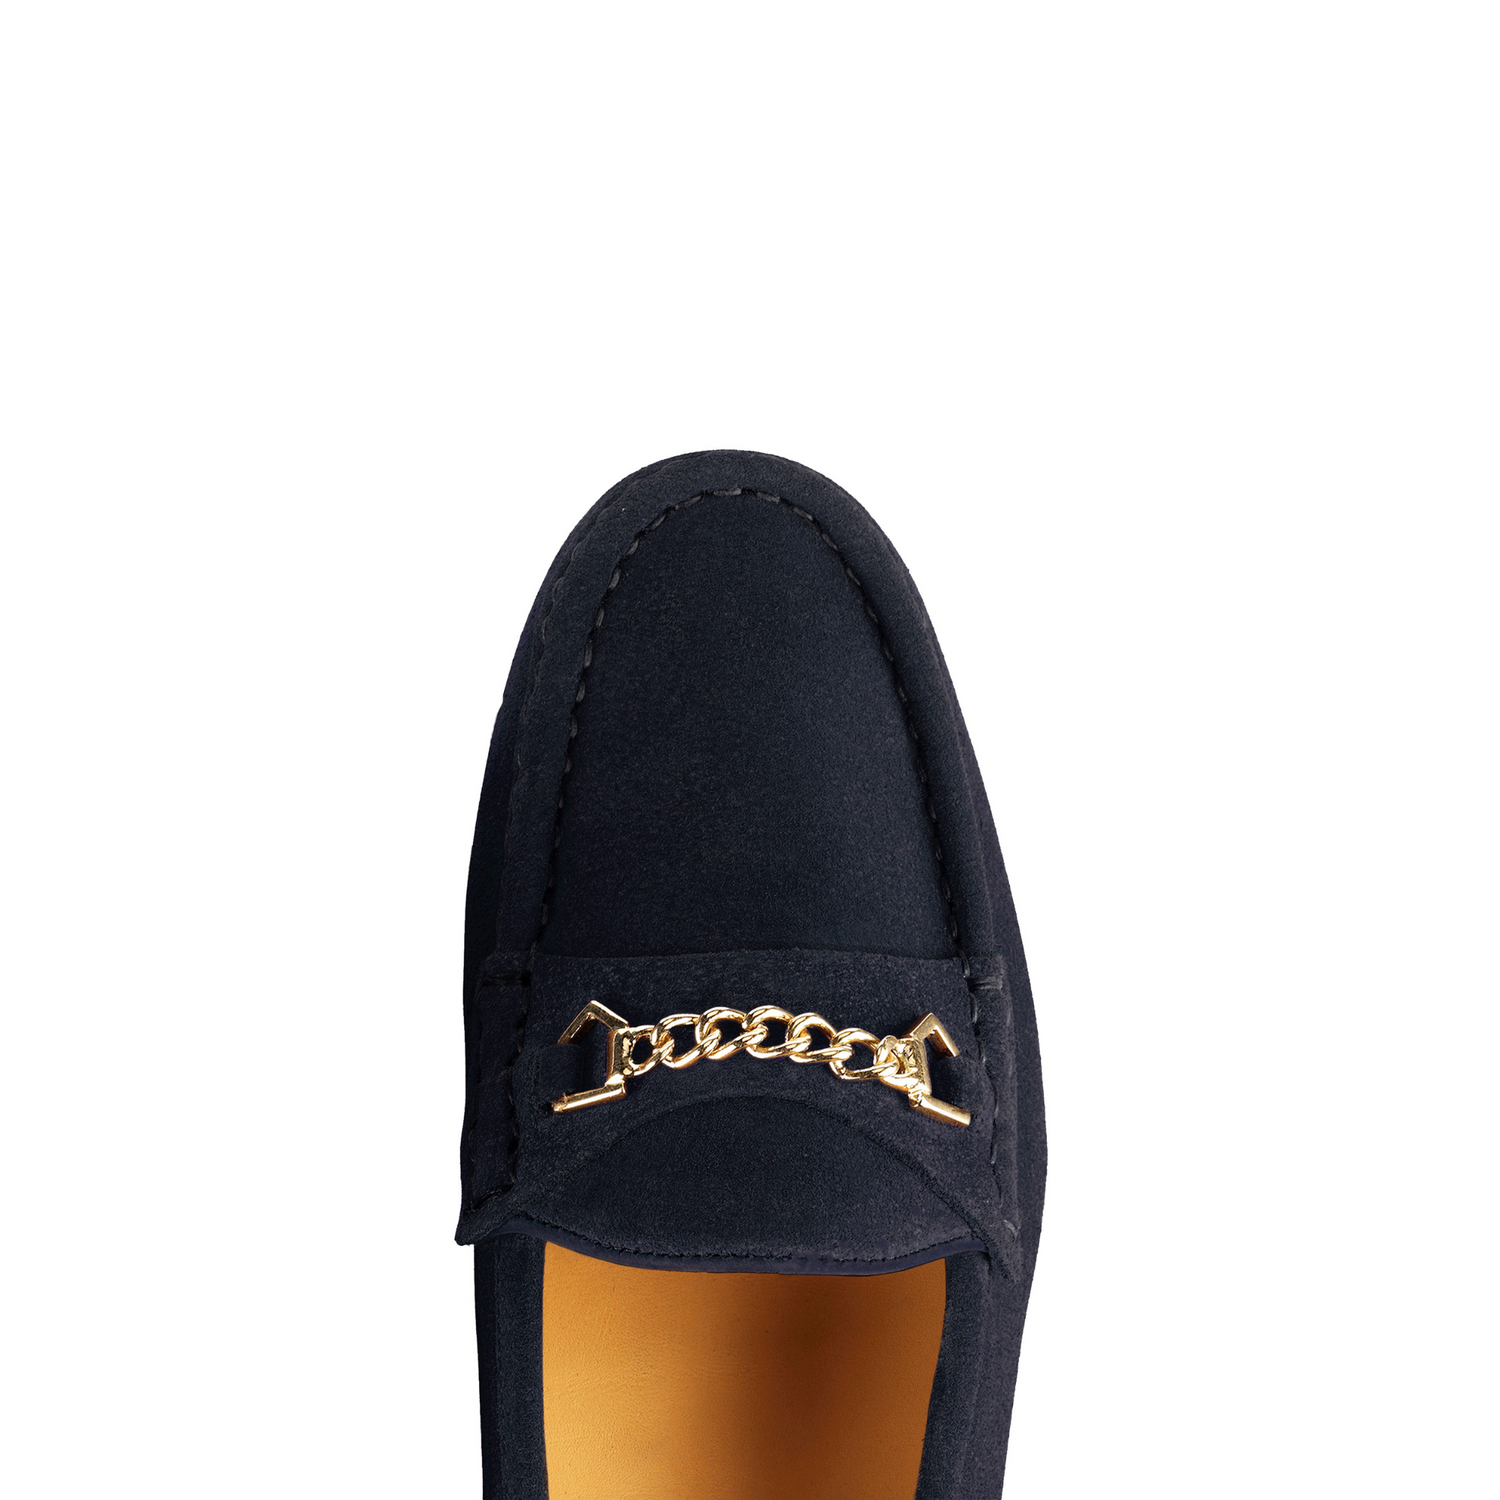 Apsley Loafer Navy Suede